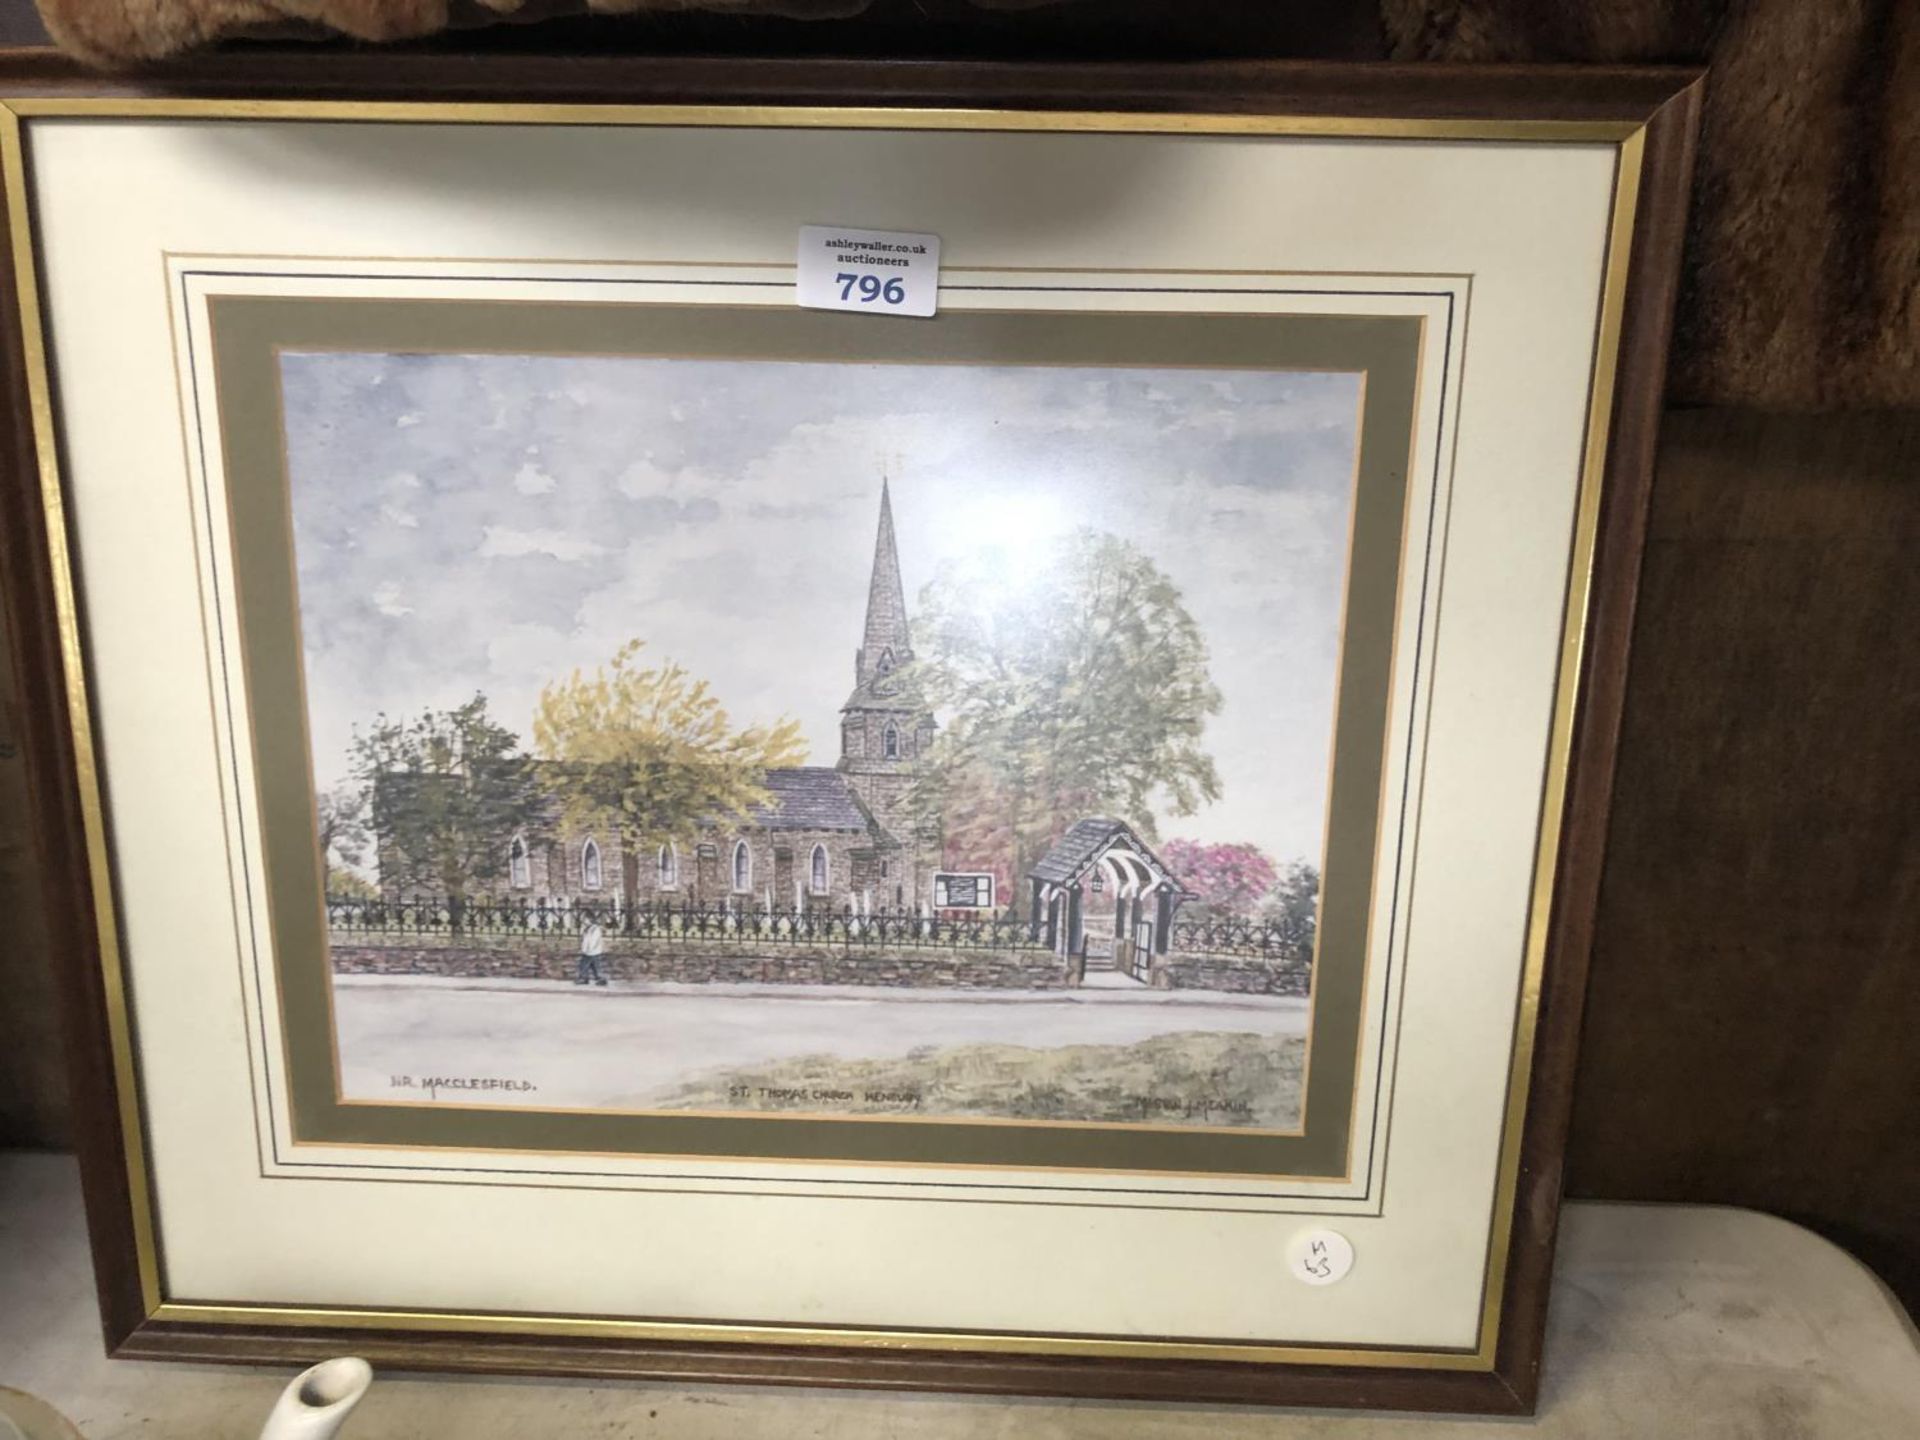 A FRAMED PICTURE OF A CHURCH, 'NR MACCLESFIELD'